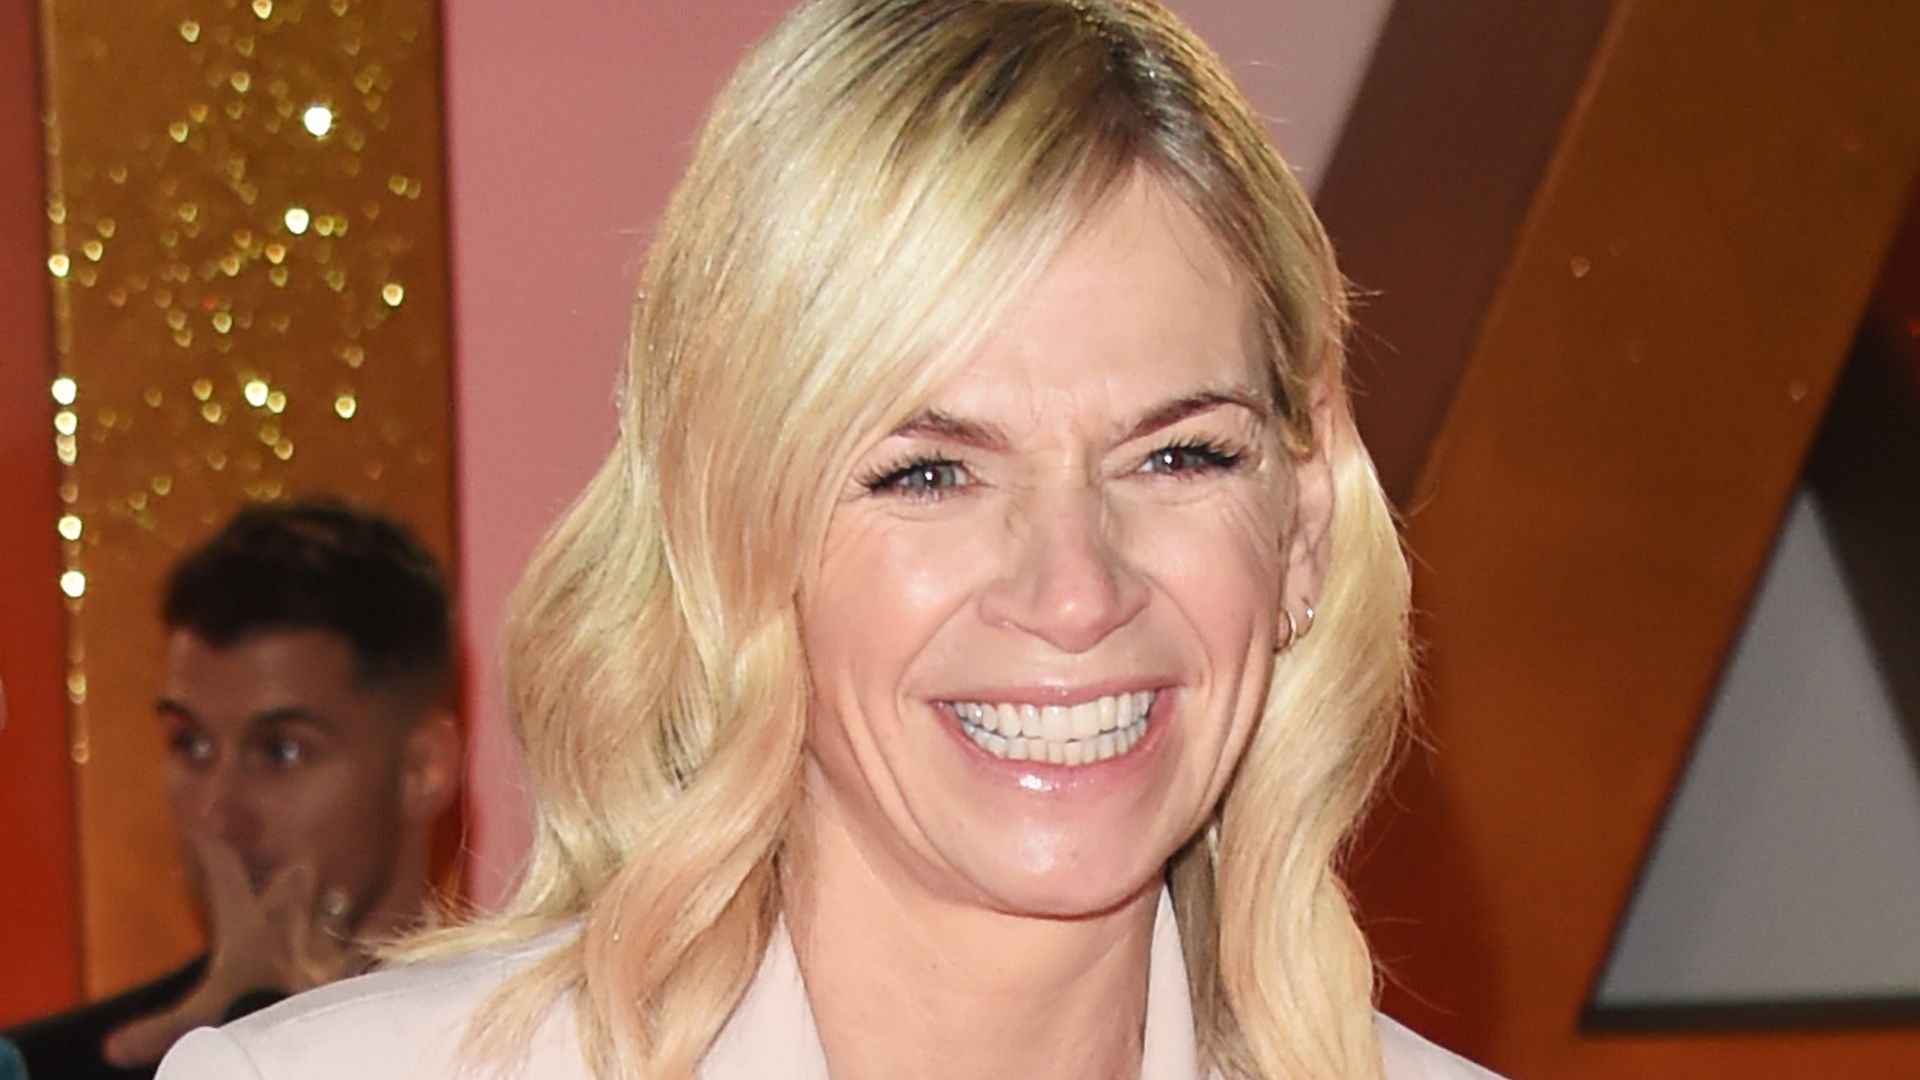  Zoe Ball in a pale pink suit laughing as she's pictured at the National Television Awards